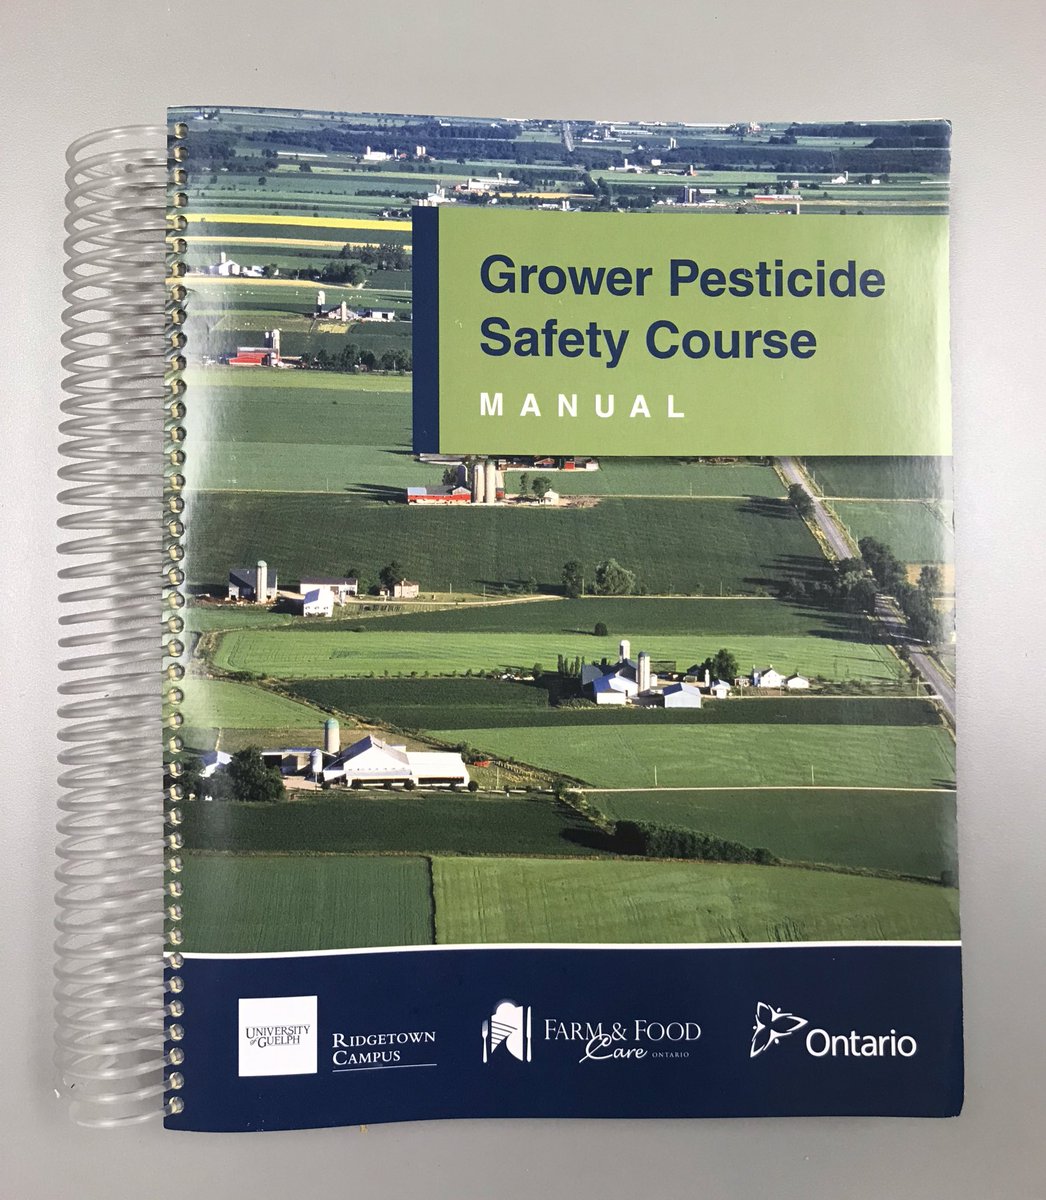 Today we hosted a grower pesticide safety course at our office. Thanks to   the course administrator, Tom Weber and to @huey_bandere @NufarmCA for sponsoring the lunch! #ontag #grow19 @agromartgroup